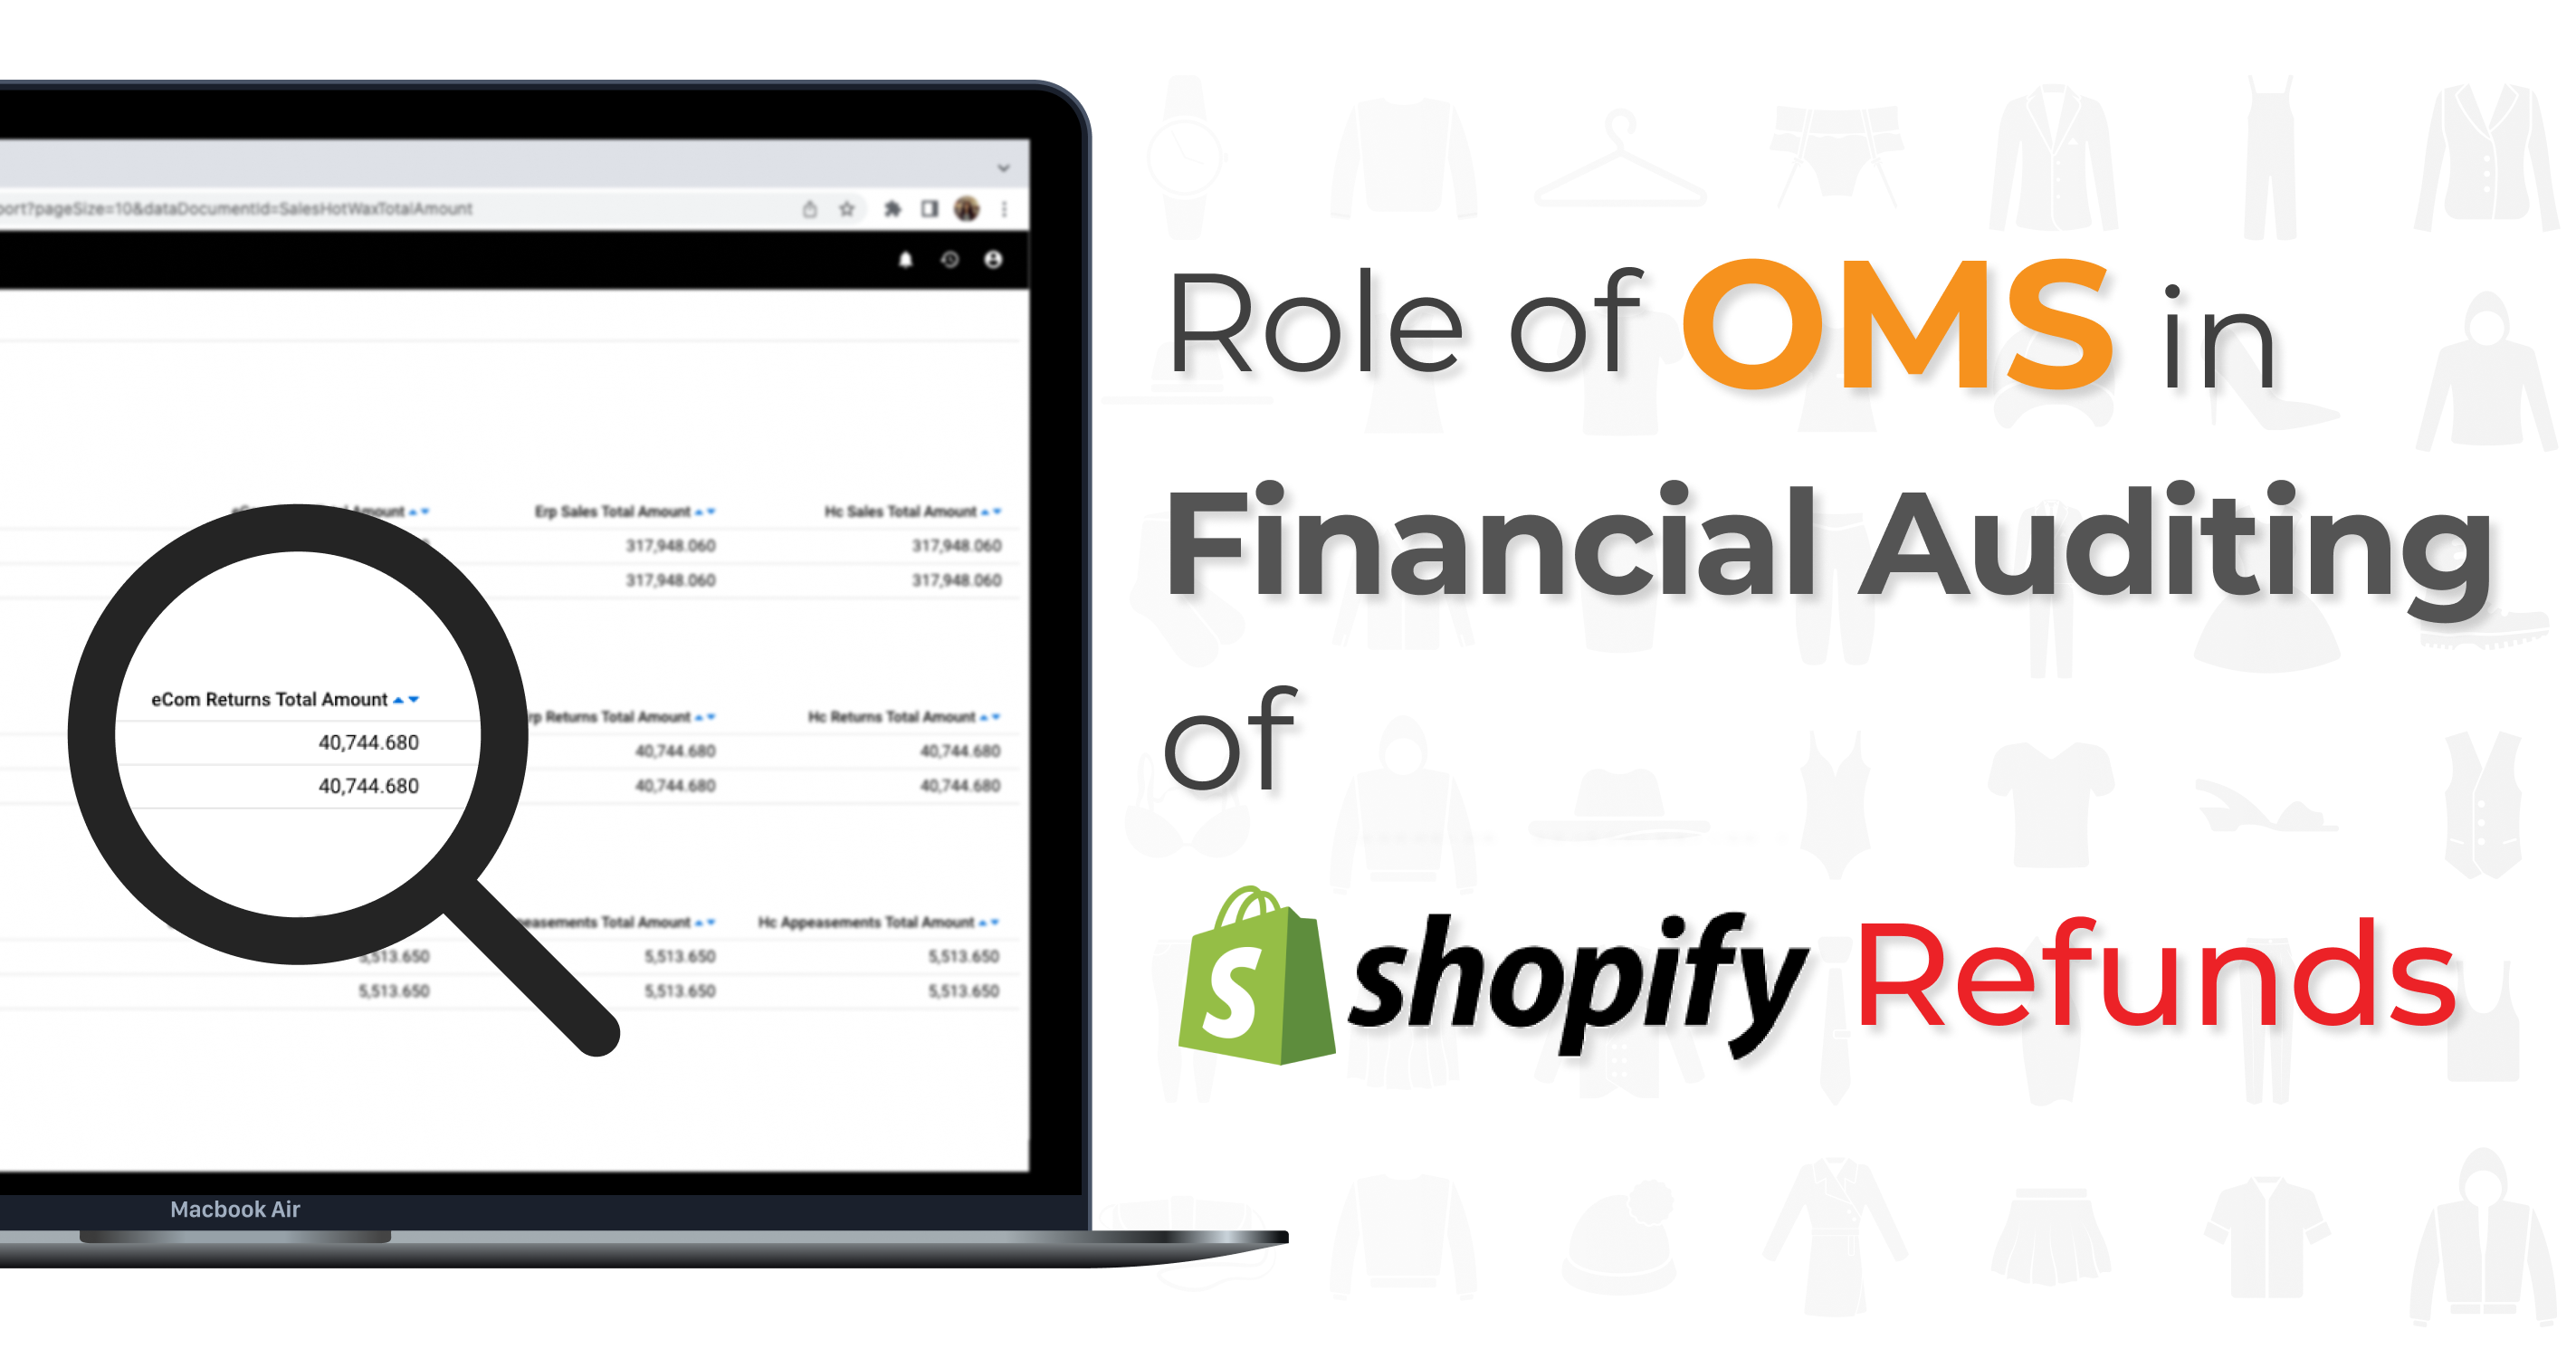 The Role of an OMS in Financial Auditing of Shopify Refunds